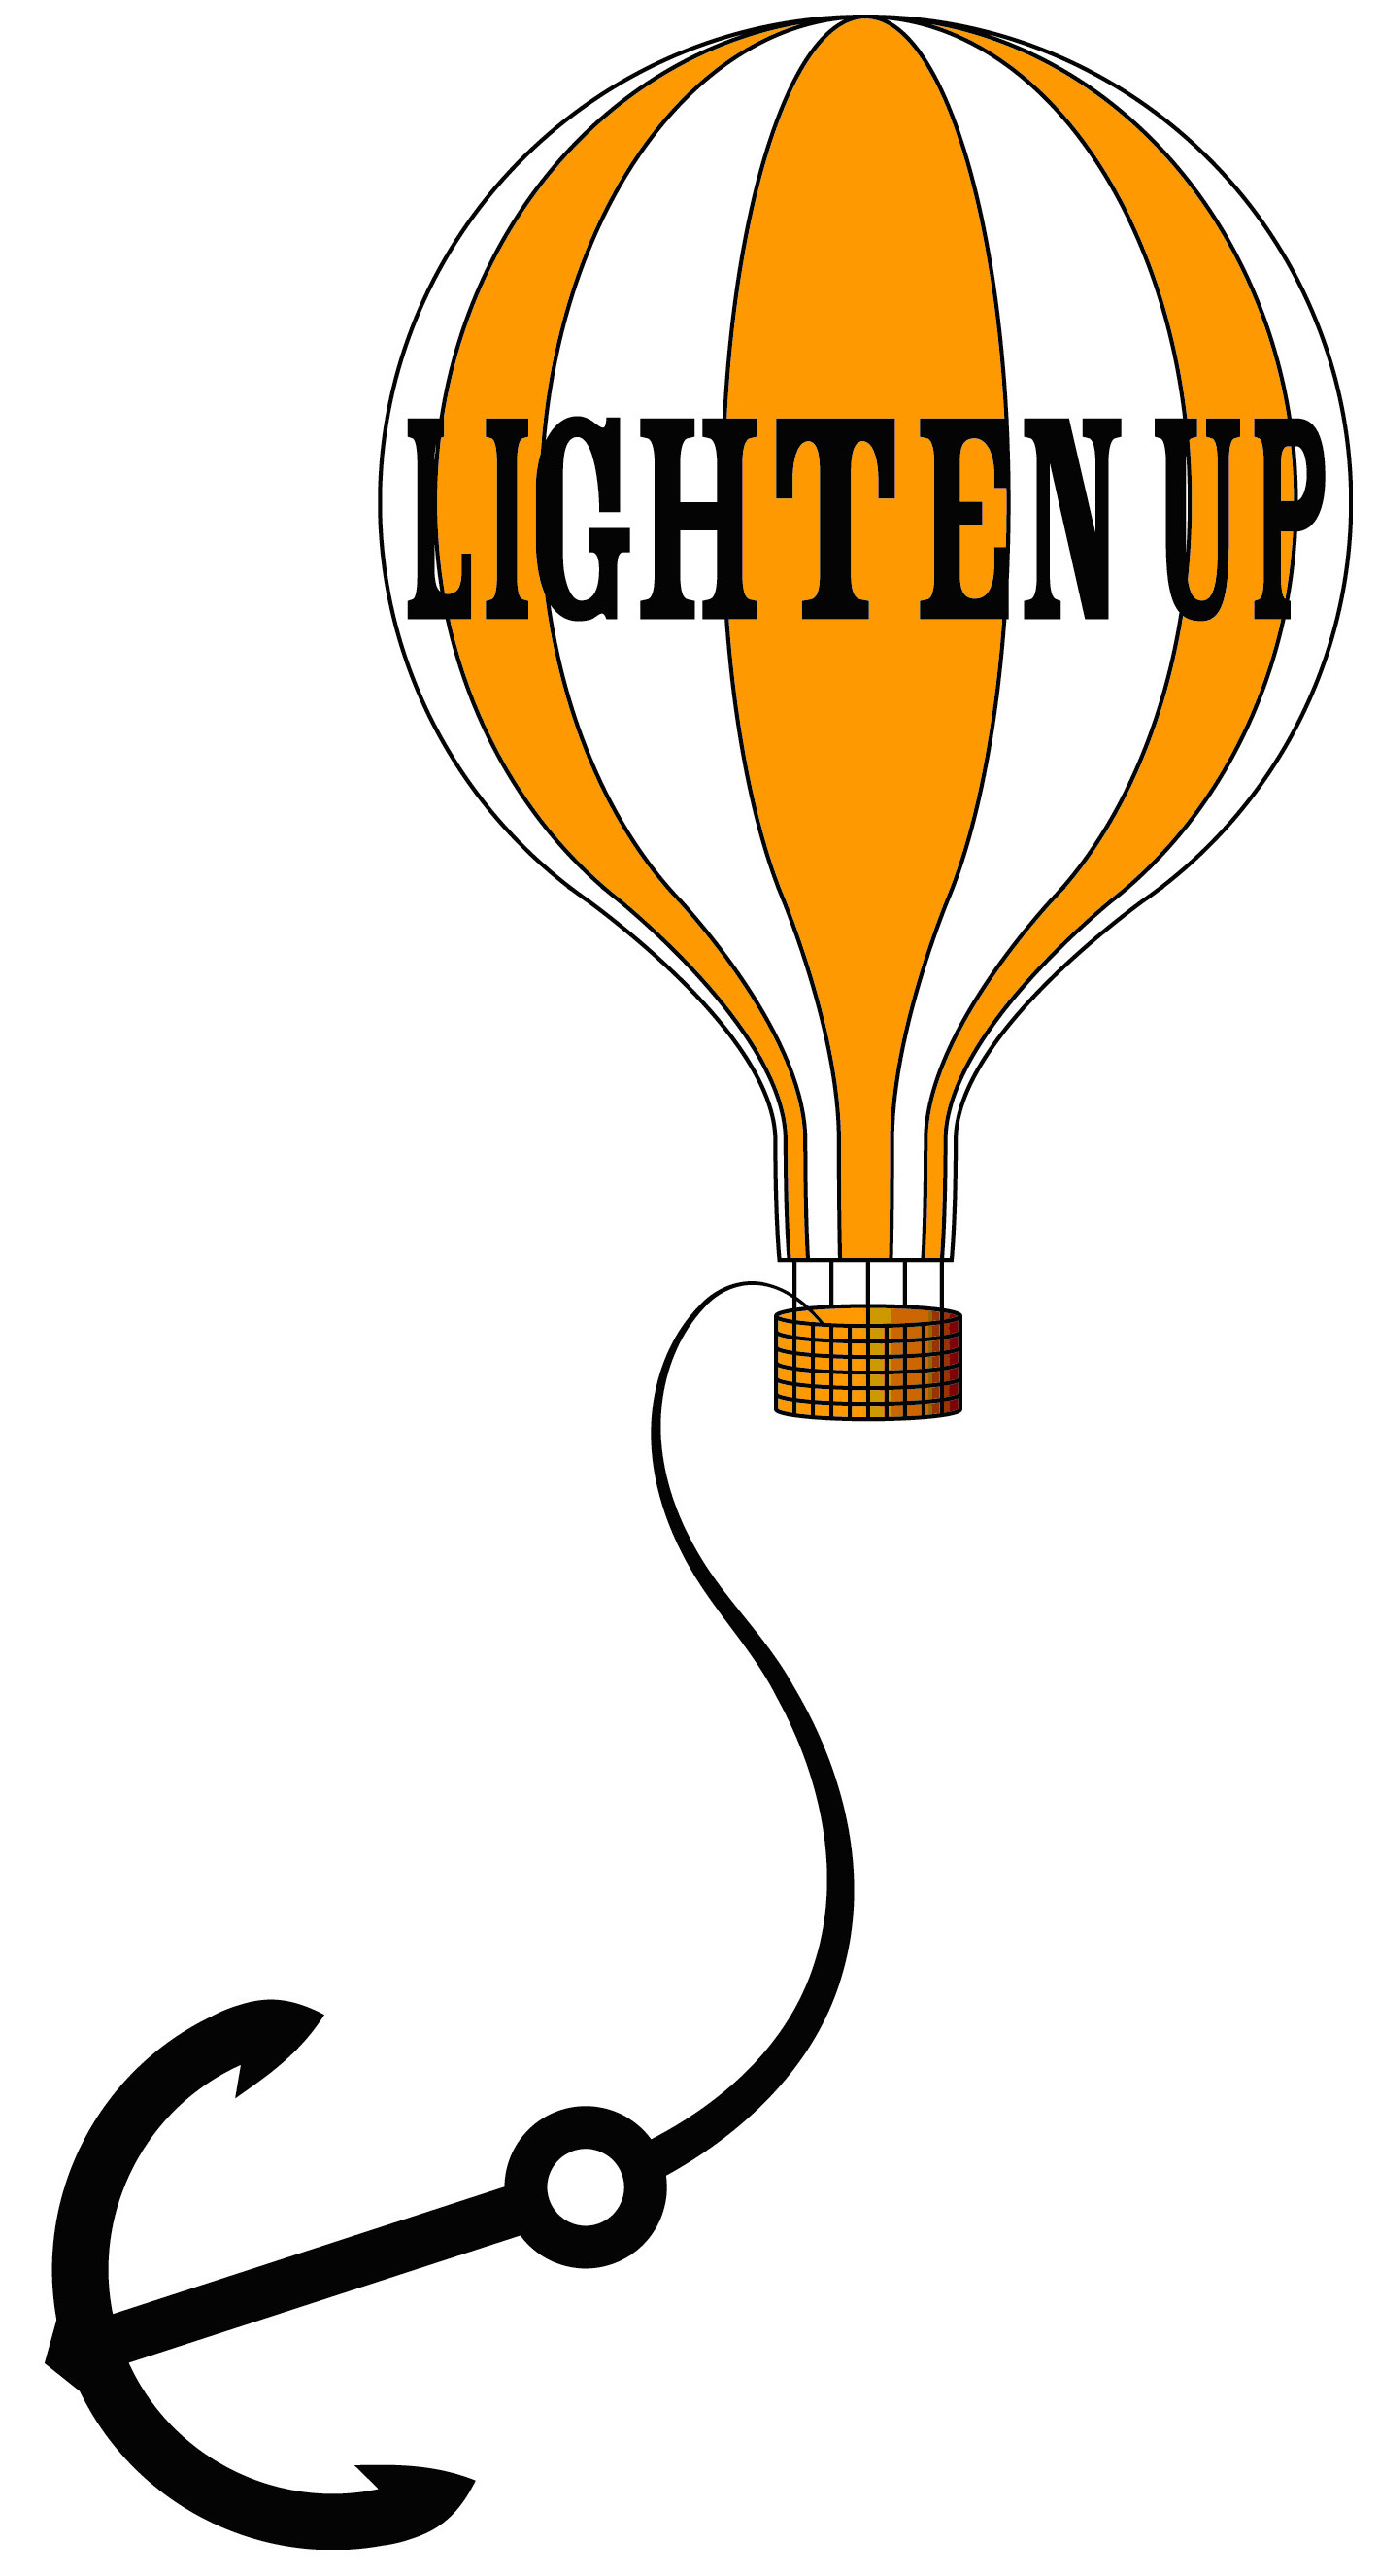 Cartoon hot air balloon in white and orange stripes, with a large anchor dangling below it